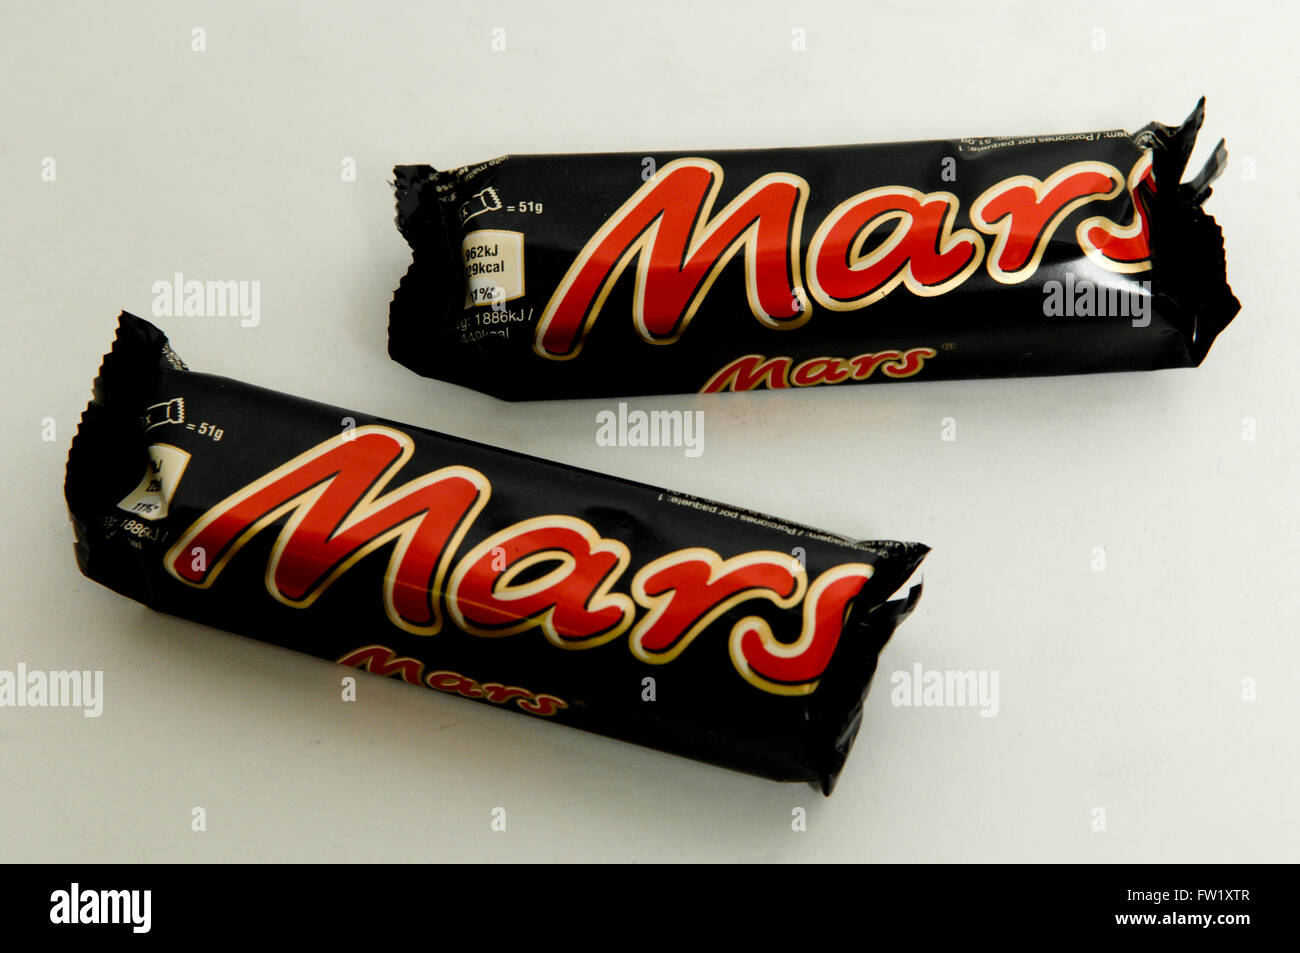 https://c8.alamy.com/comp/FW1XTR/mars-is-a-british-chocolate-bar-it-was-first-manufactured-in-1932-FW1XTR.jpg